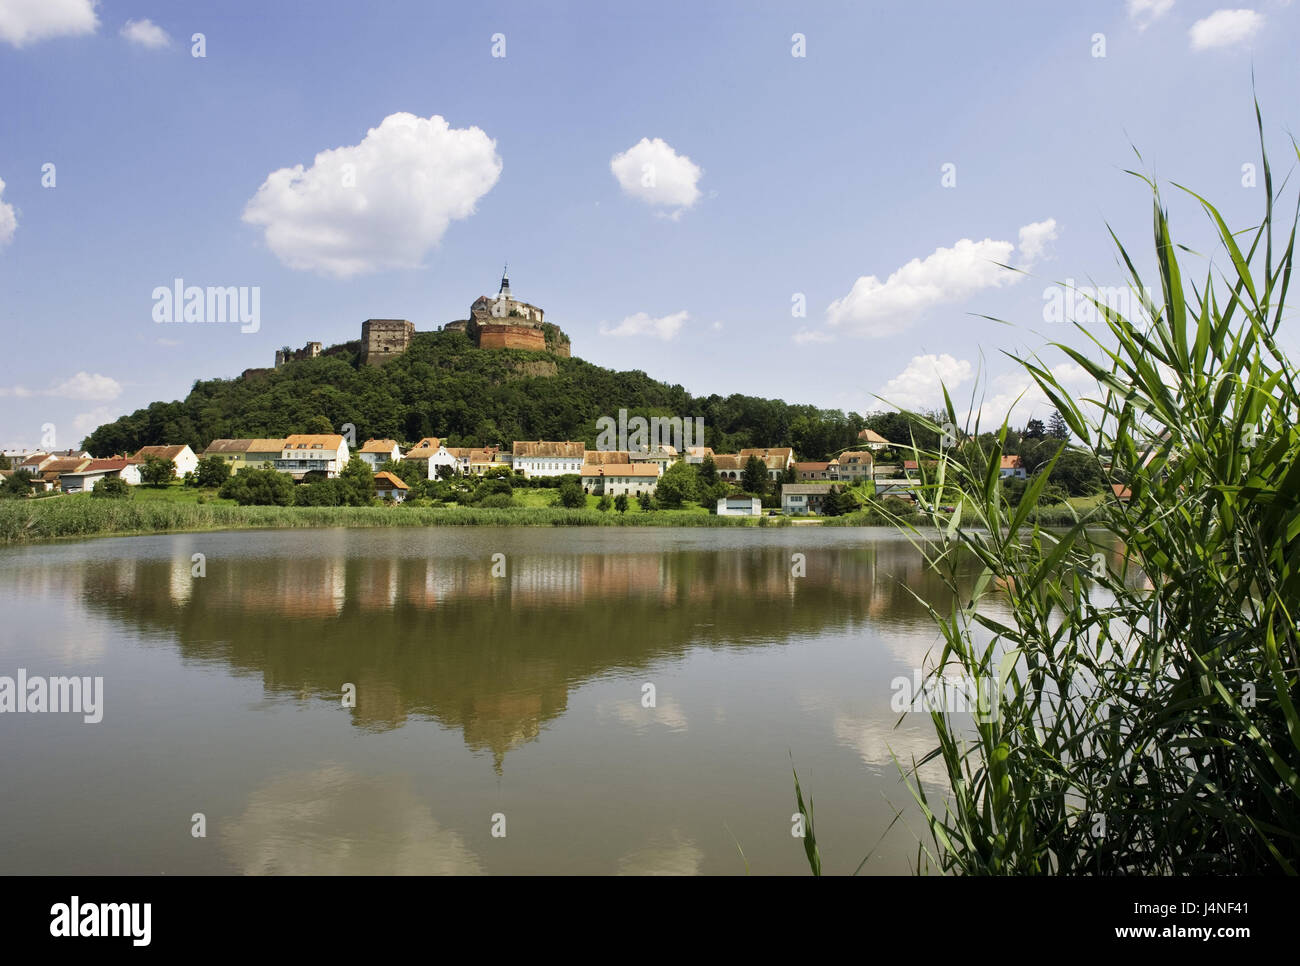 Austria, Burgenland, Stremtal, fishpond, reflexion, lock mountain, castle Güssing, town view, fishpond, castle, height castle, castle grounds, landmark, place of interest, tourism, houses, residential houses, sunshine, pond, sky, blue, clouds, reed, grass, Stock Photo